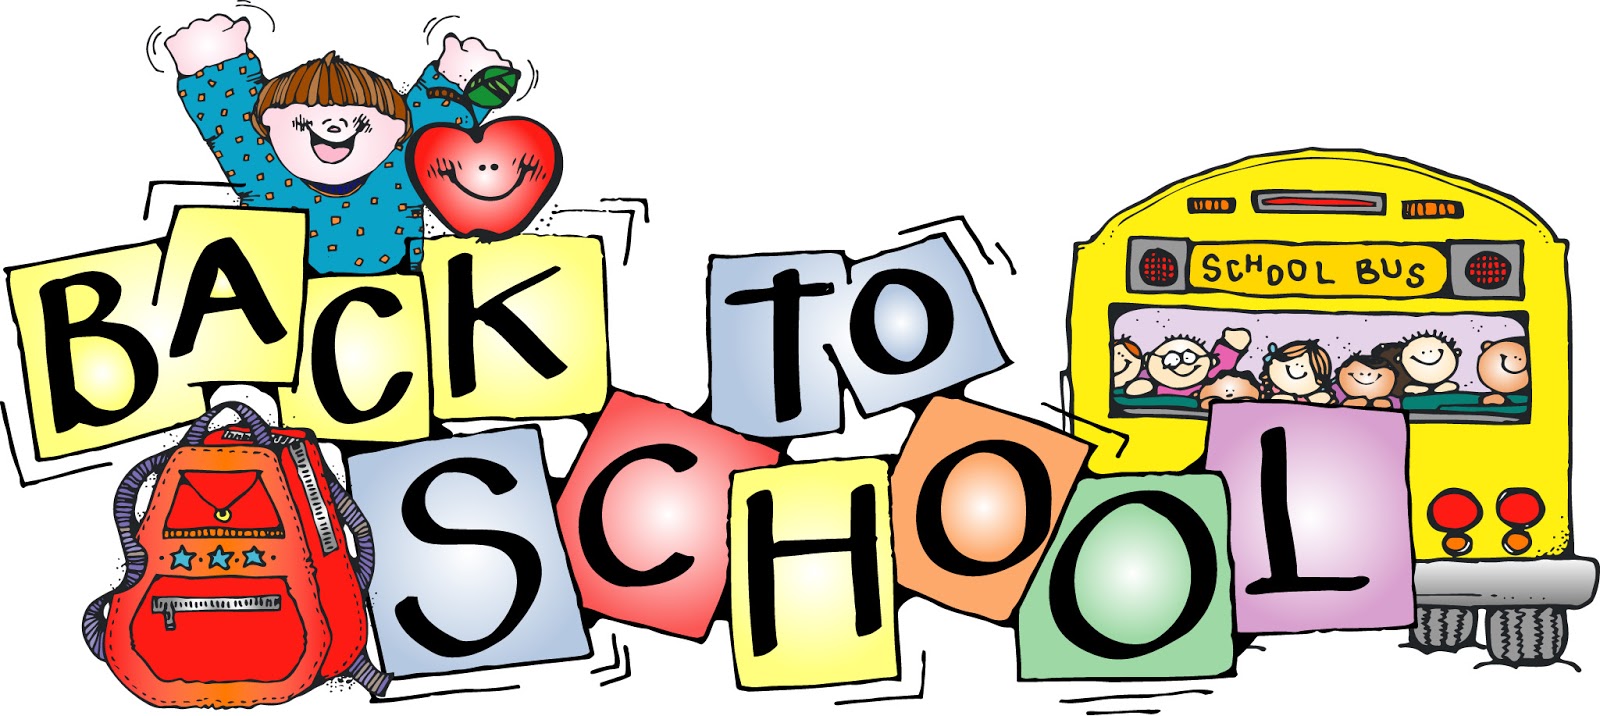 back to school party clip art - photo #33